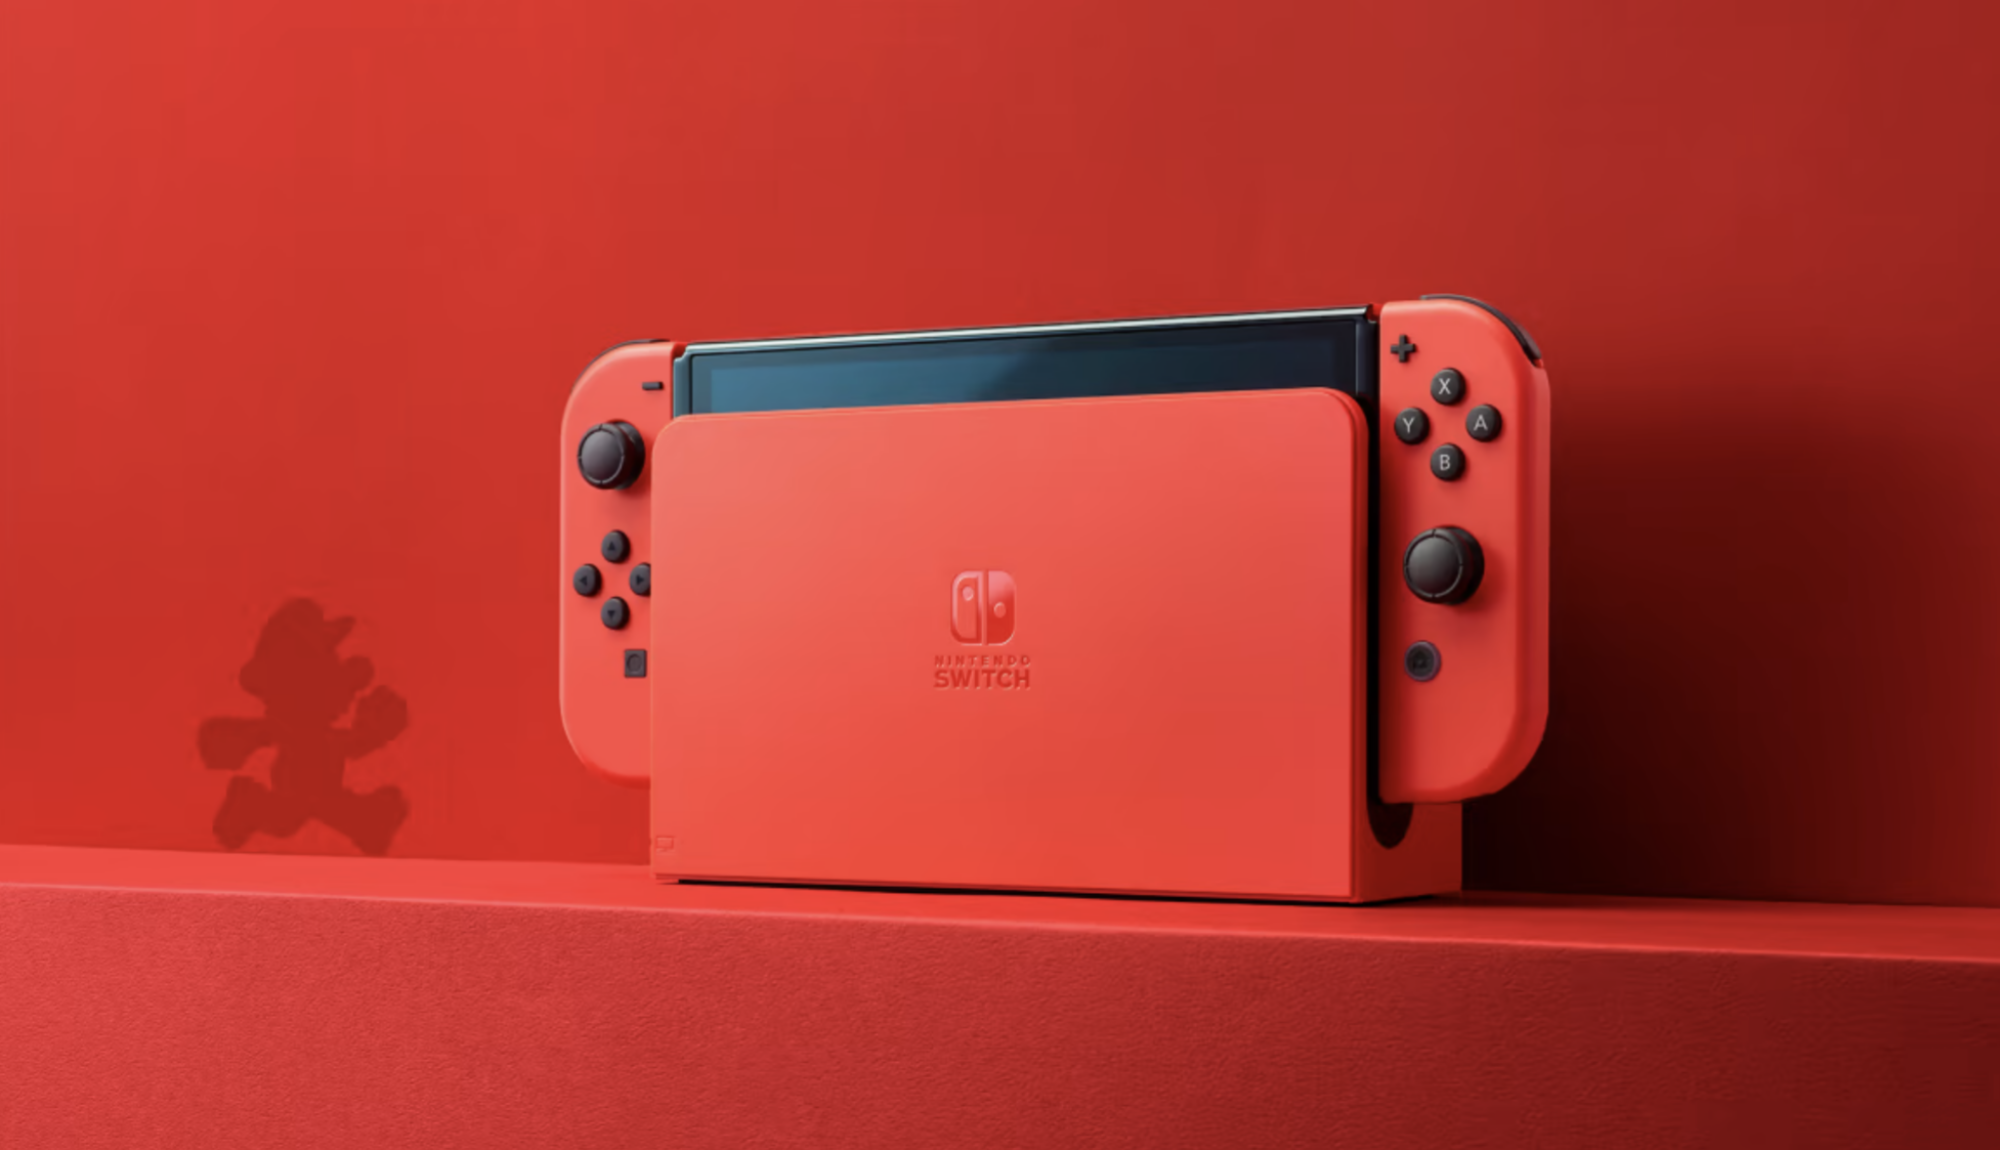 nintendo switch oled model in mario red edition against red wall with Mario shadow